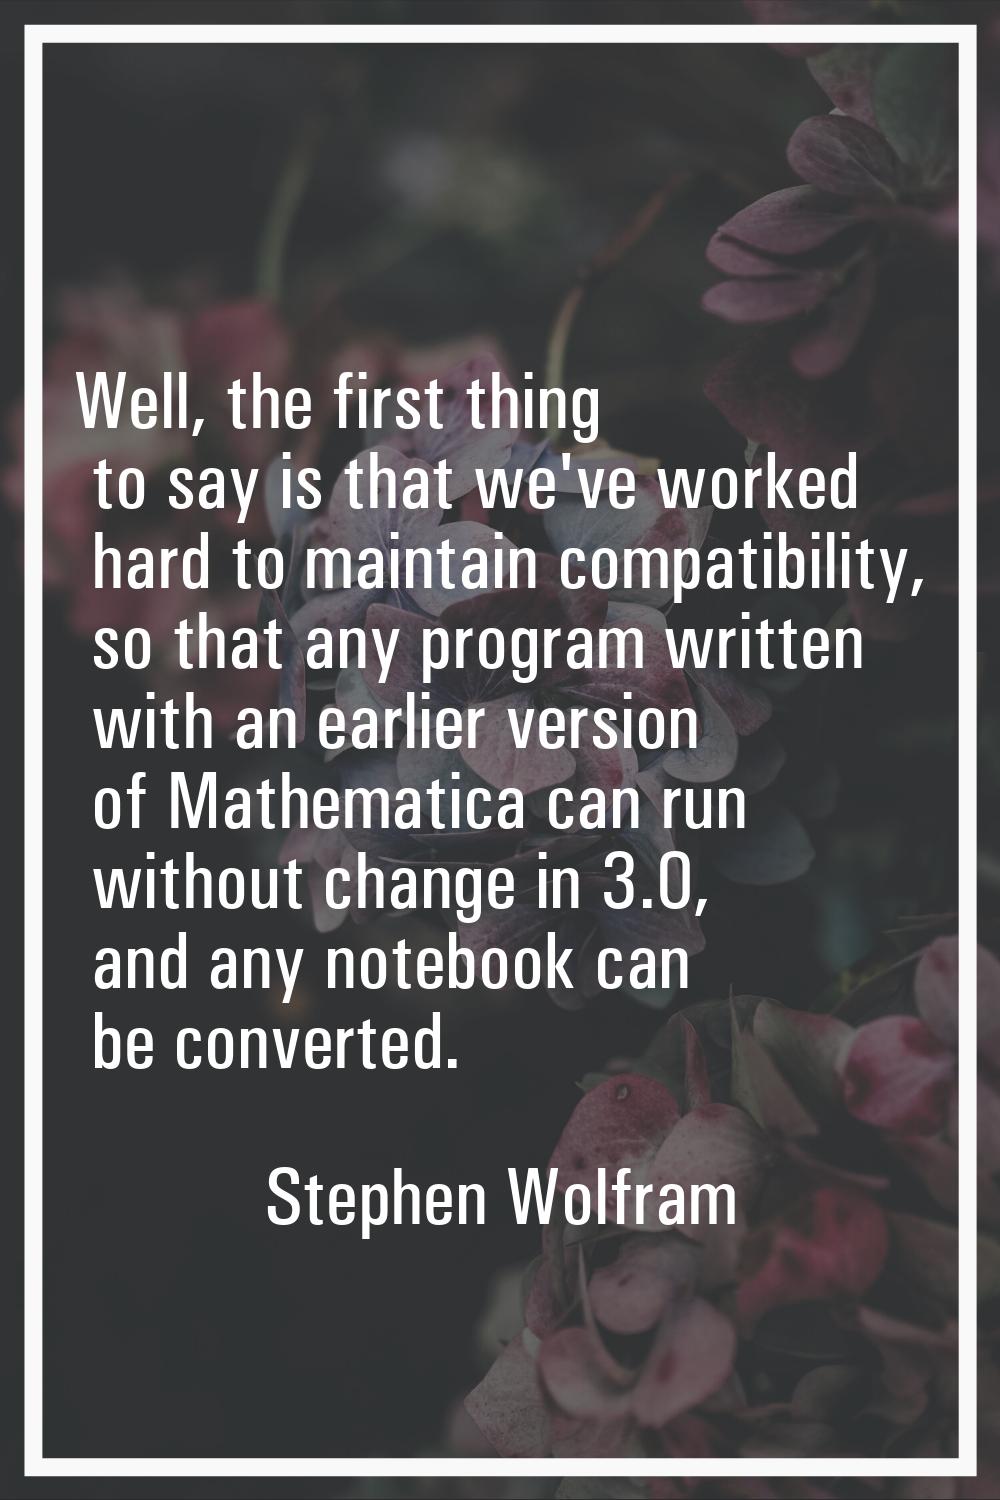 Well, the first thing to say is that we've worked hard to maintain compatibility, so that any progr